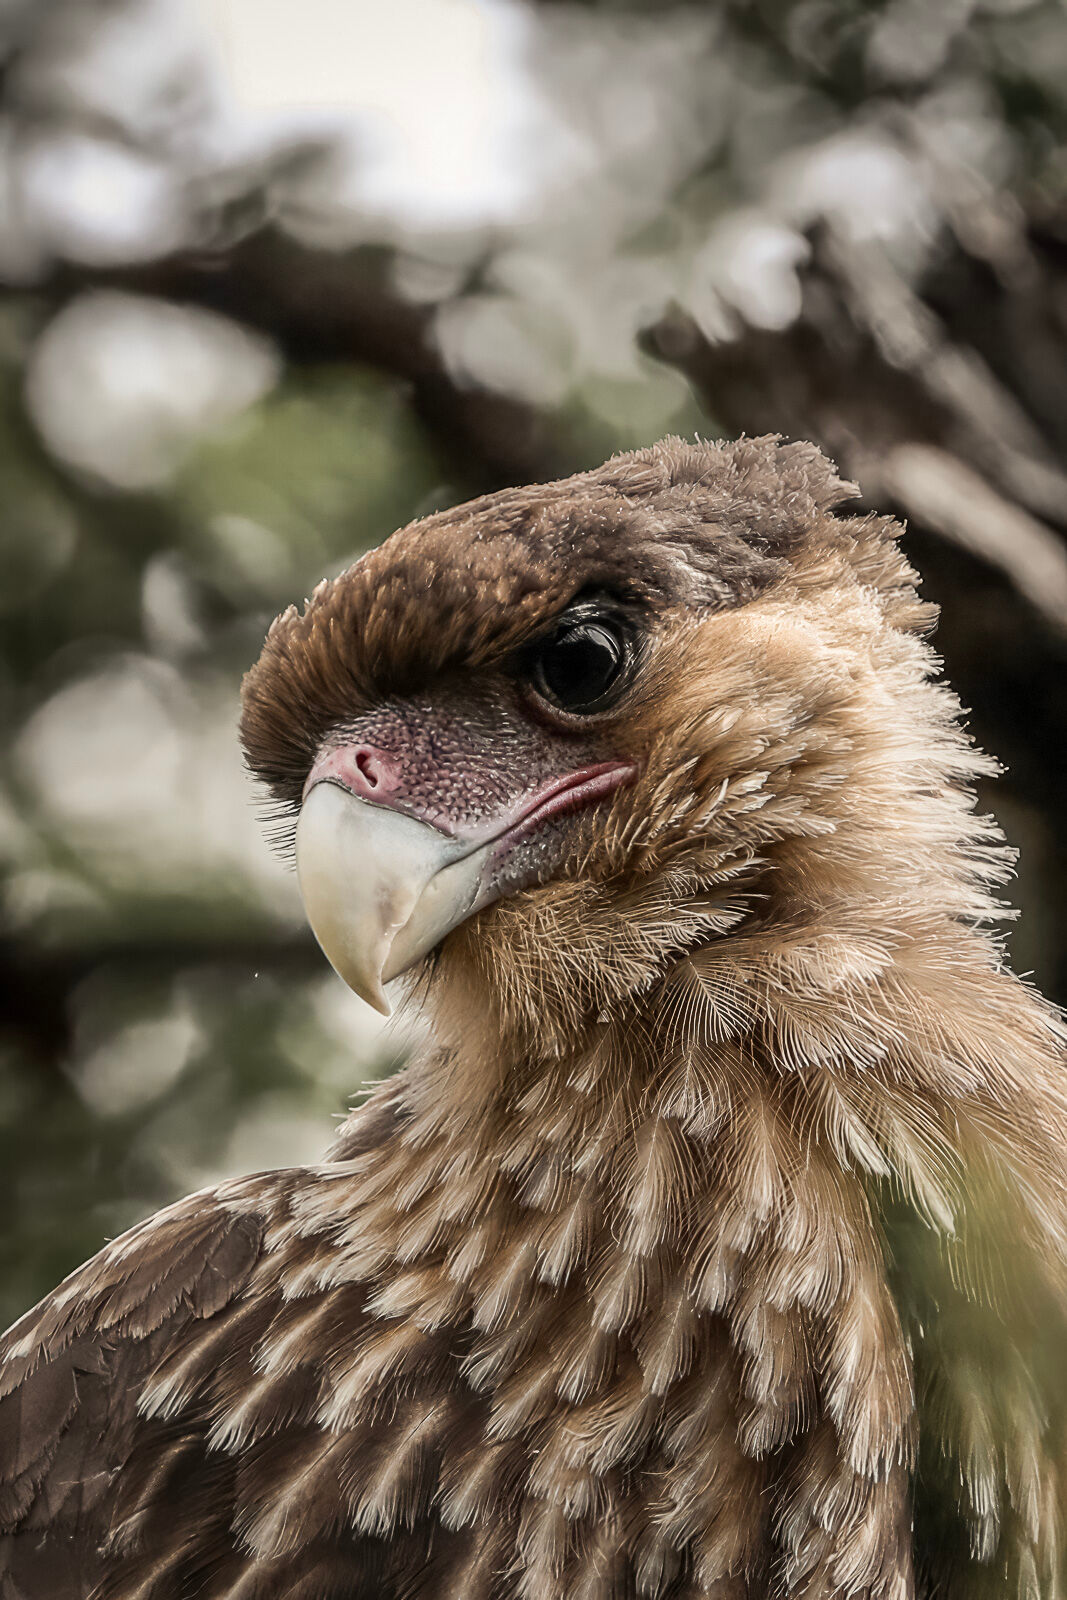 An immature Crested Caracara looks down from his perch in a tree.